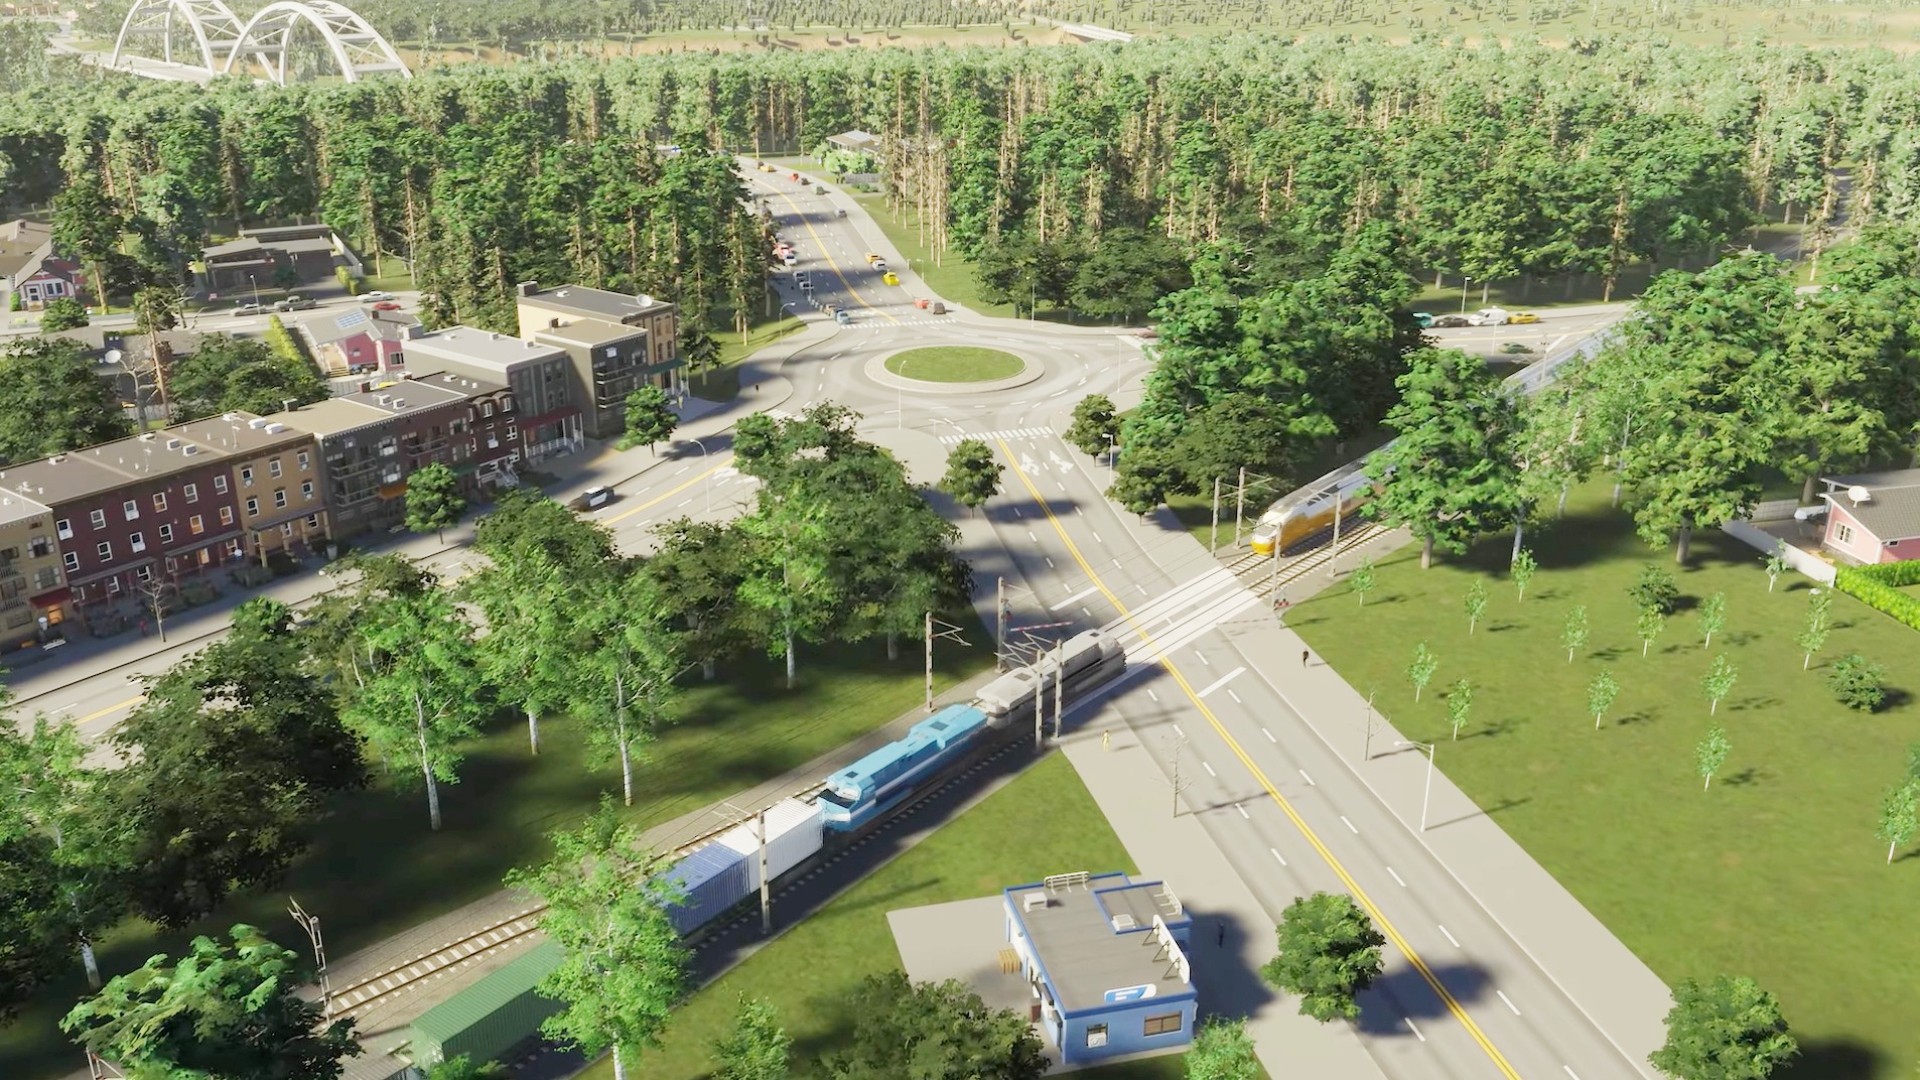 Cities Skylines 2 Gamescom interview: A intersecting roundabout in Colossal Order city-building game Cities Skylines 2